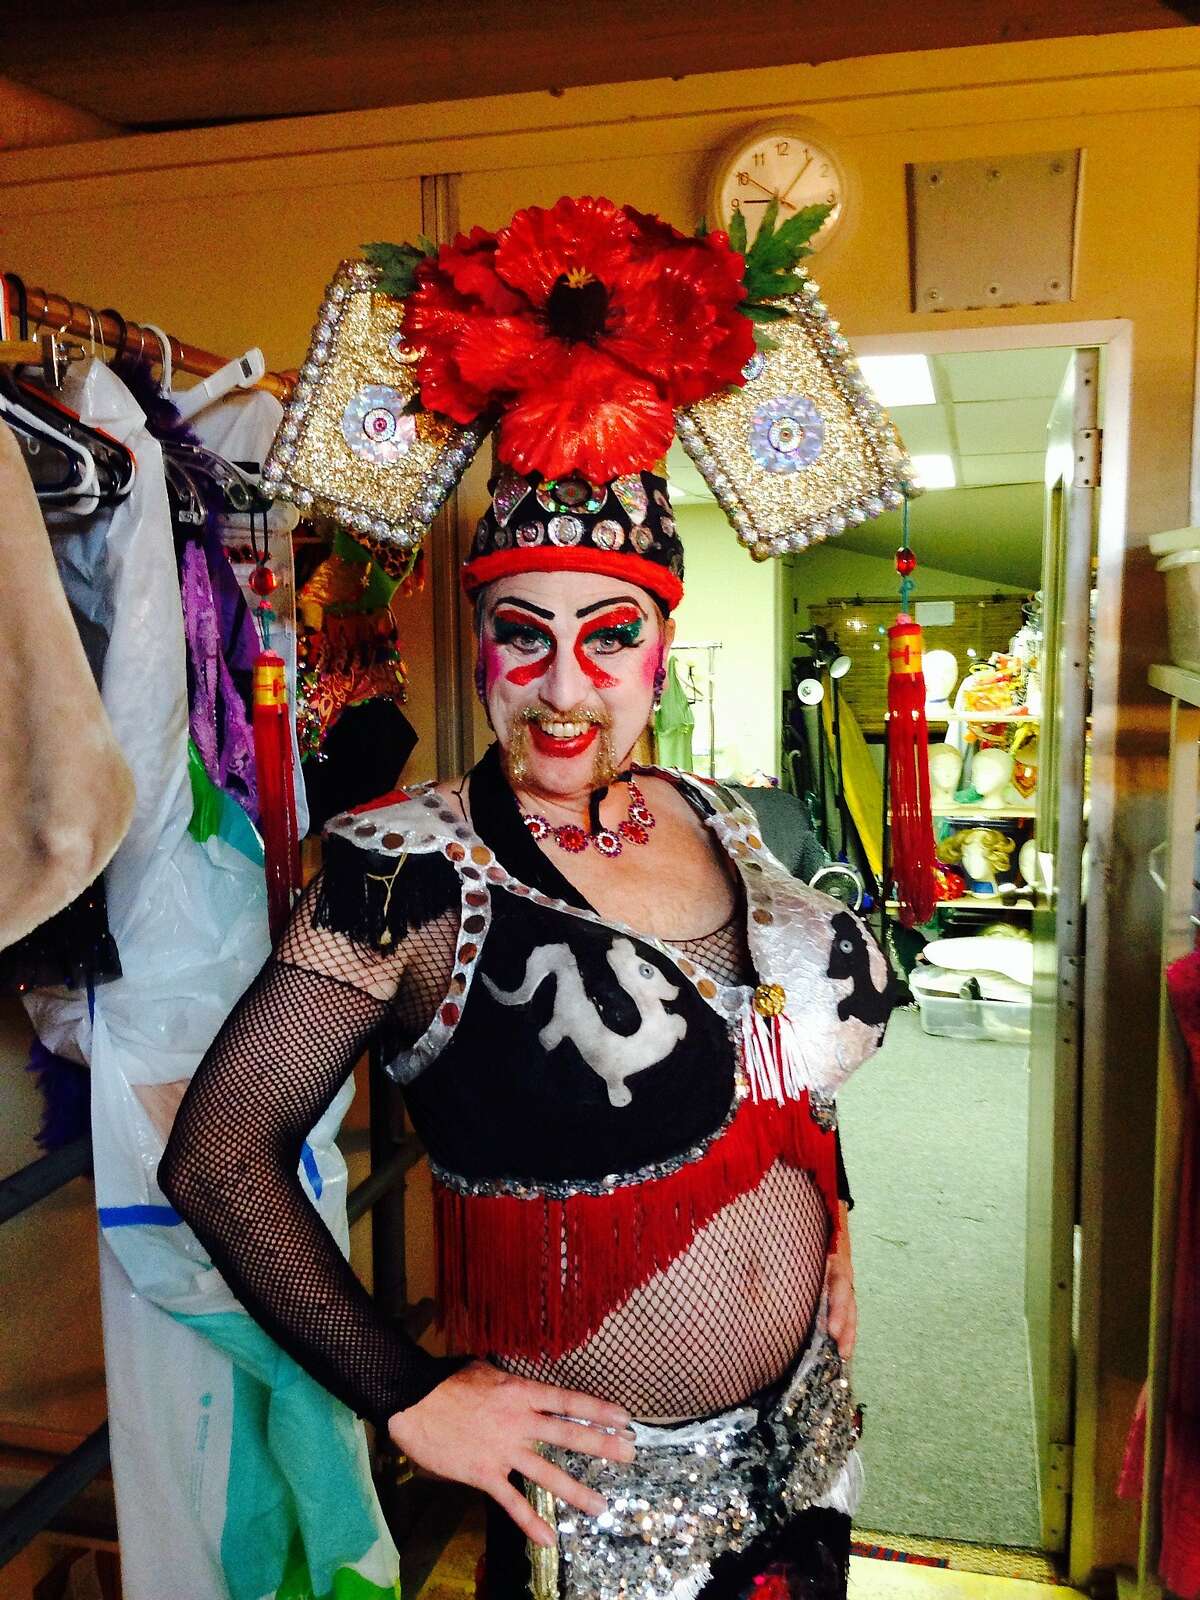 Russell Blackwood as Mother Fu backstage at "Pearls Over Shanghai"